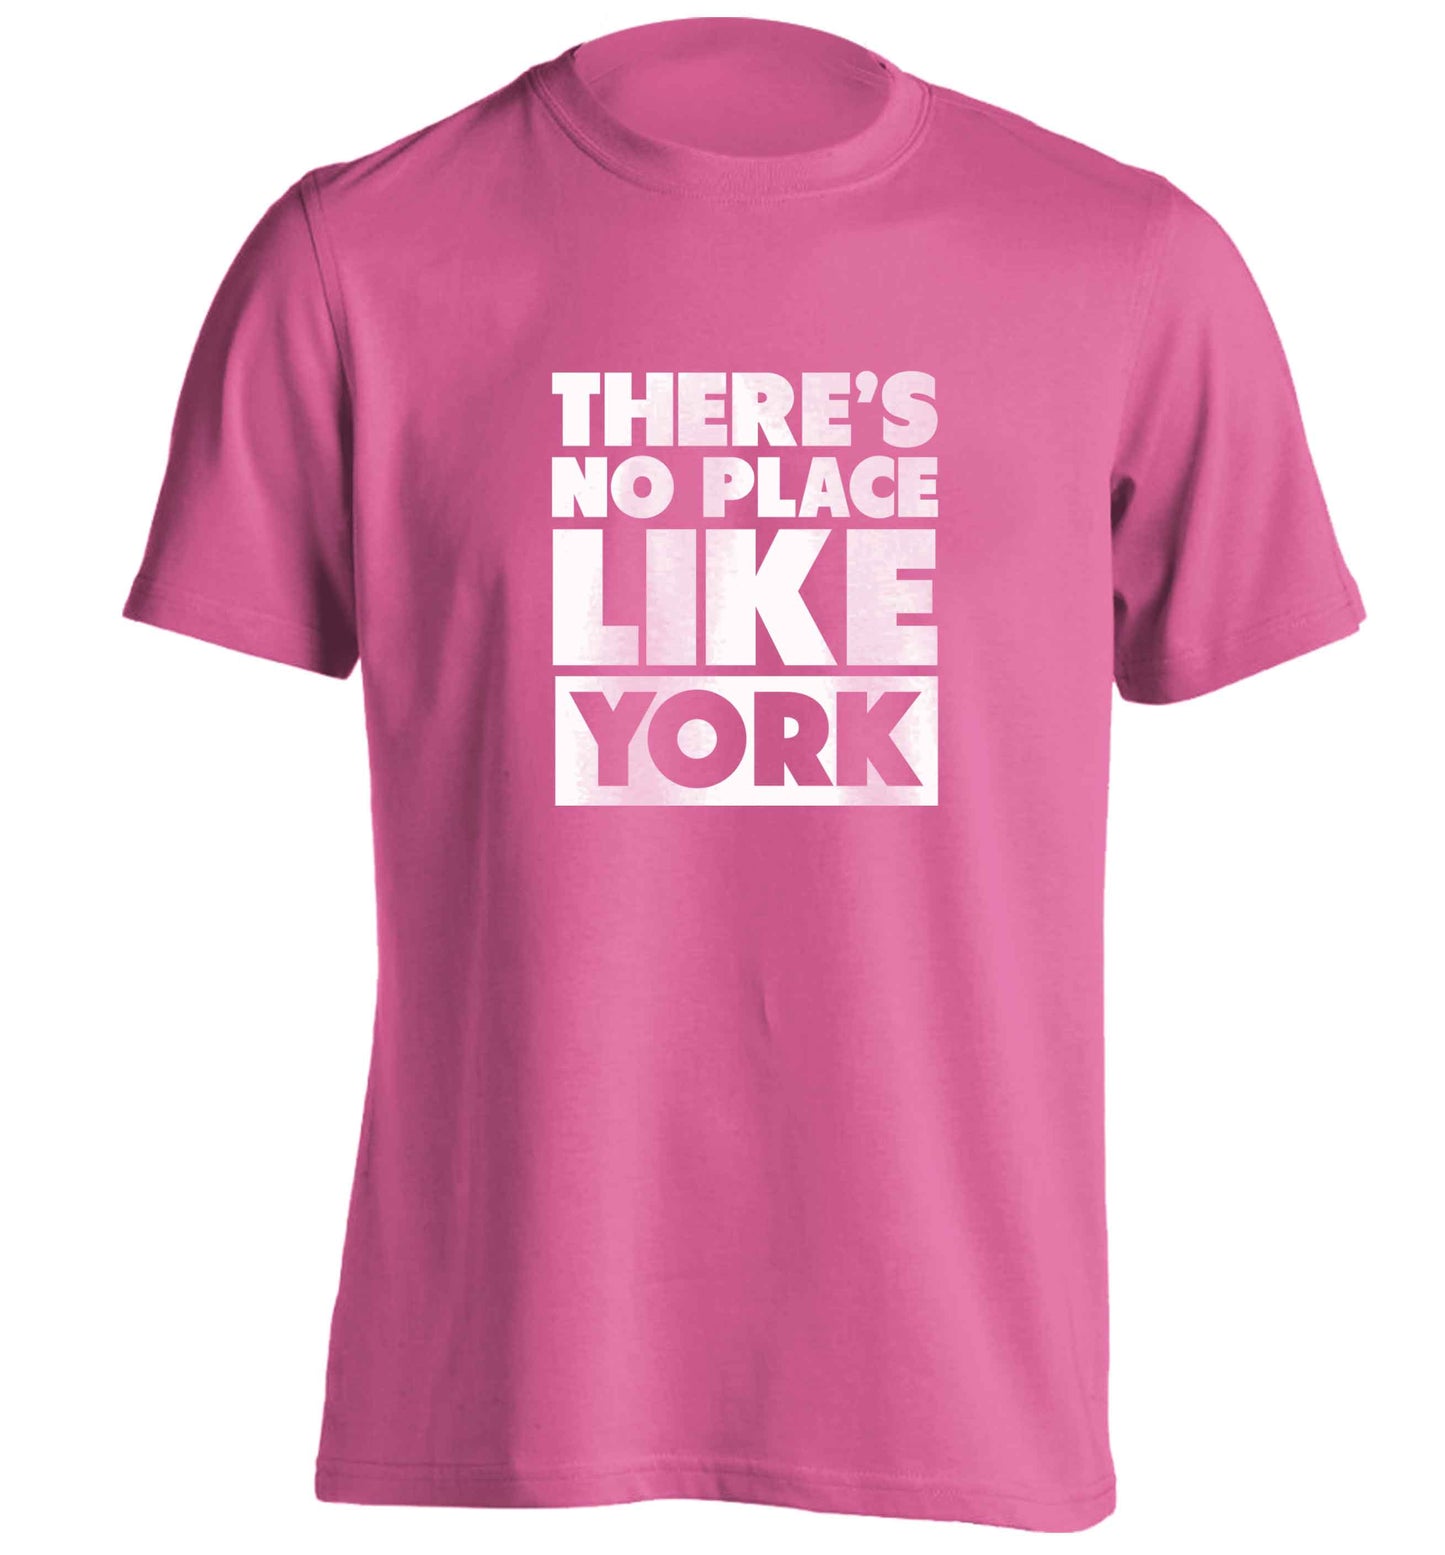 There's no place like york adults unisex pink Tshirt 2XL